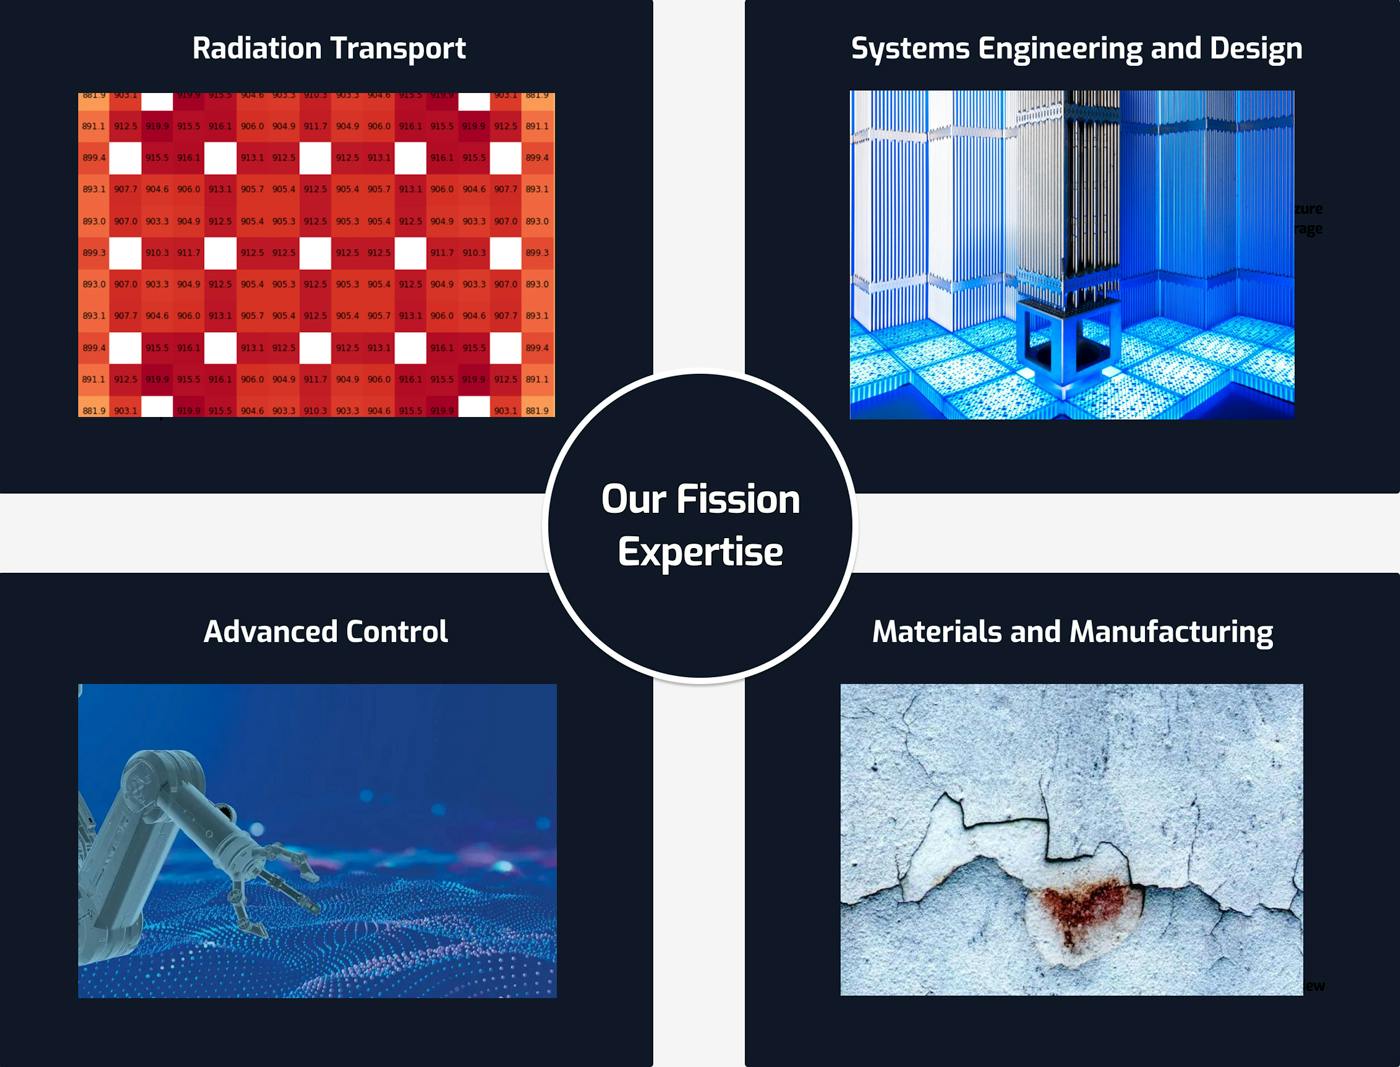 Our expertise in Fission